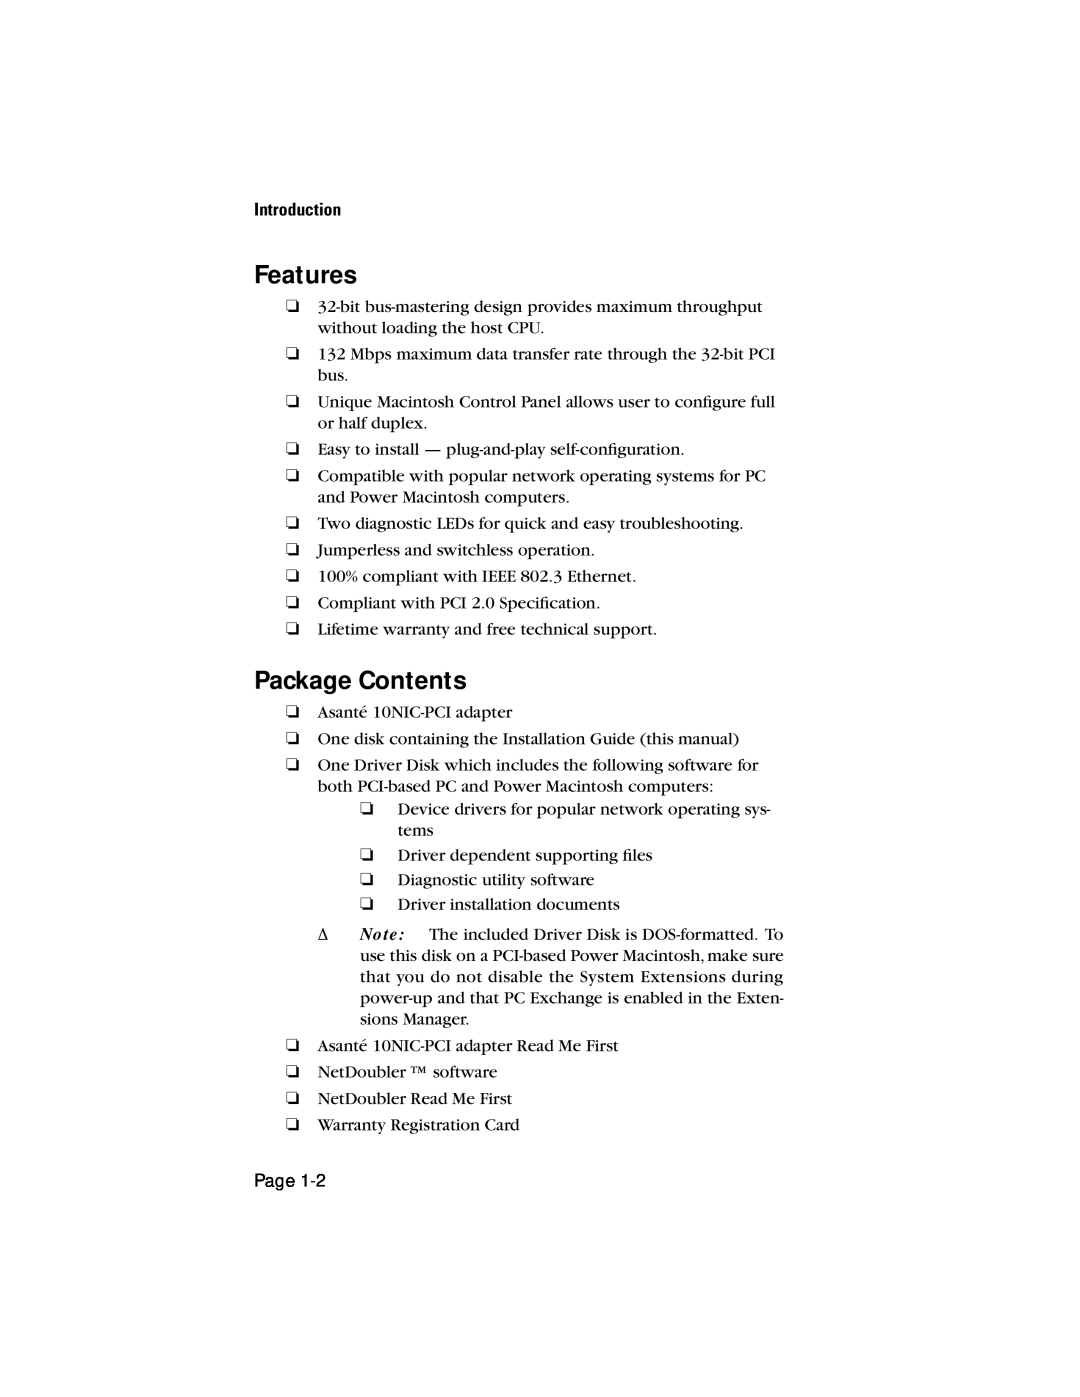 Asante Technologies 10NIC-PCITM manual Features, Package Contents, Introduction 